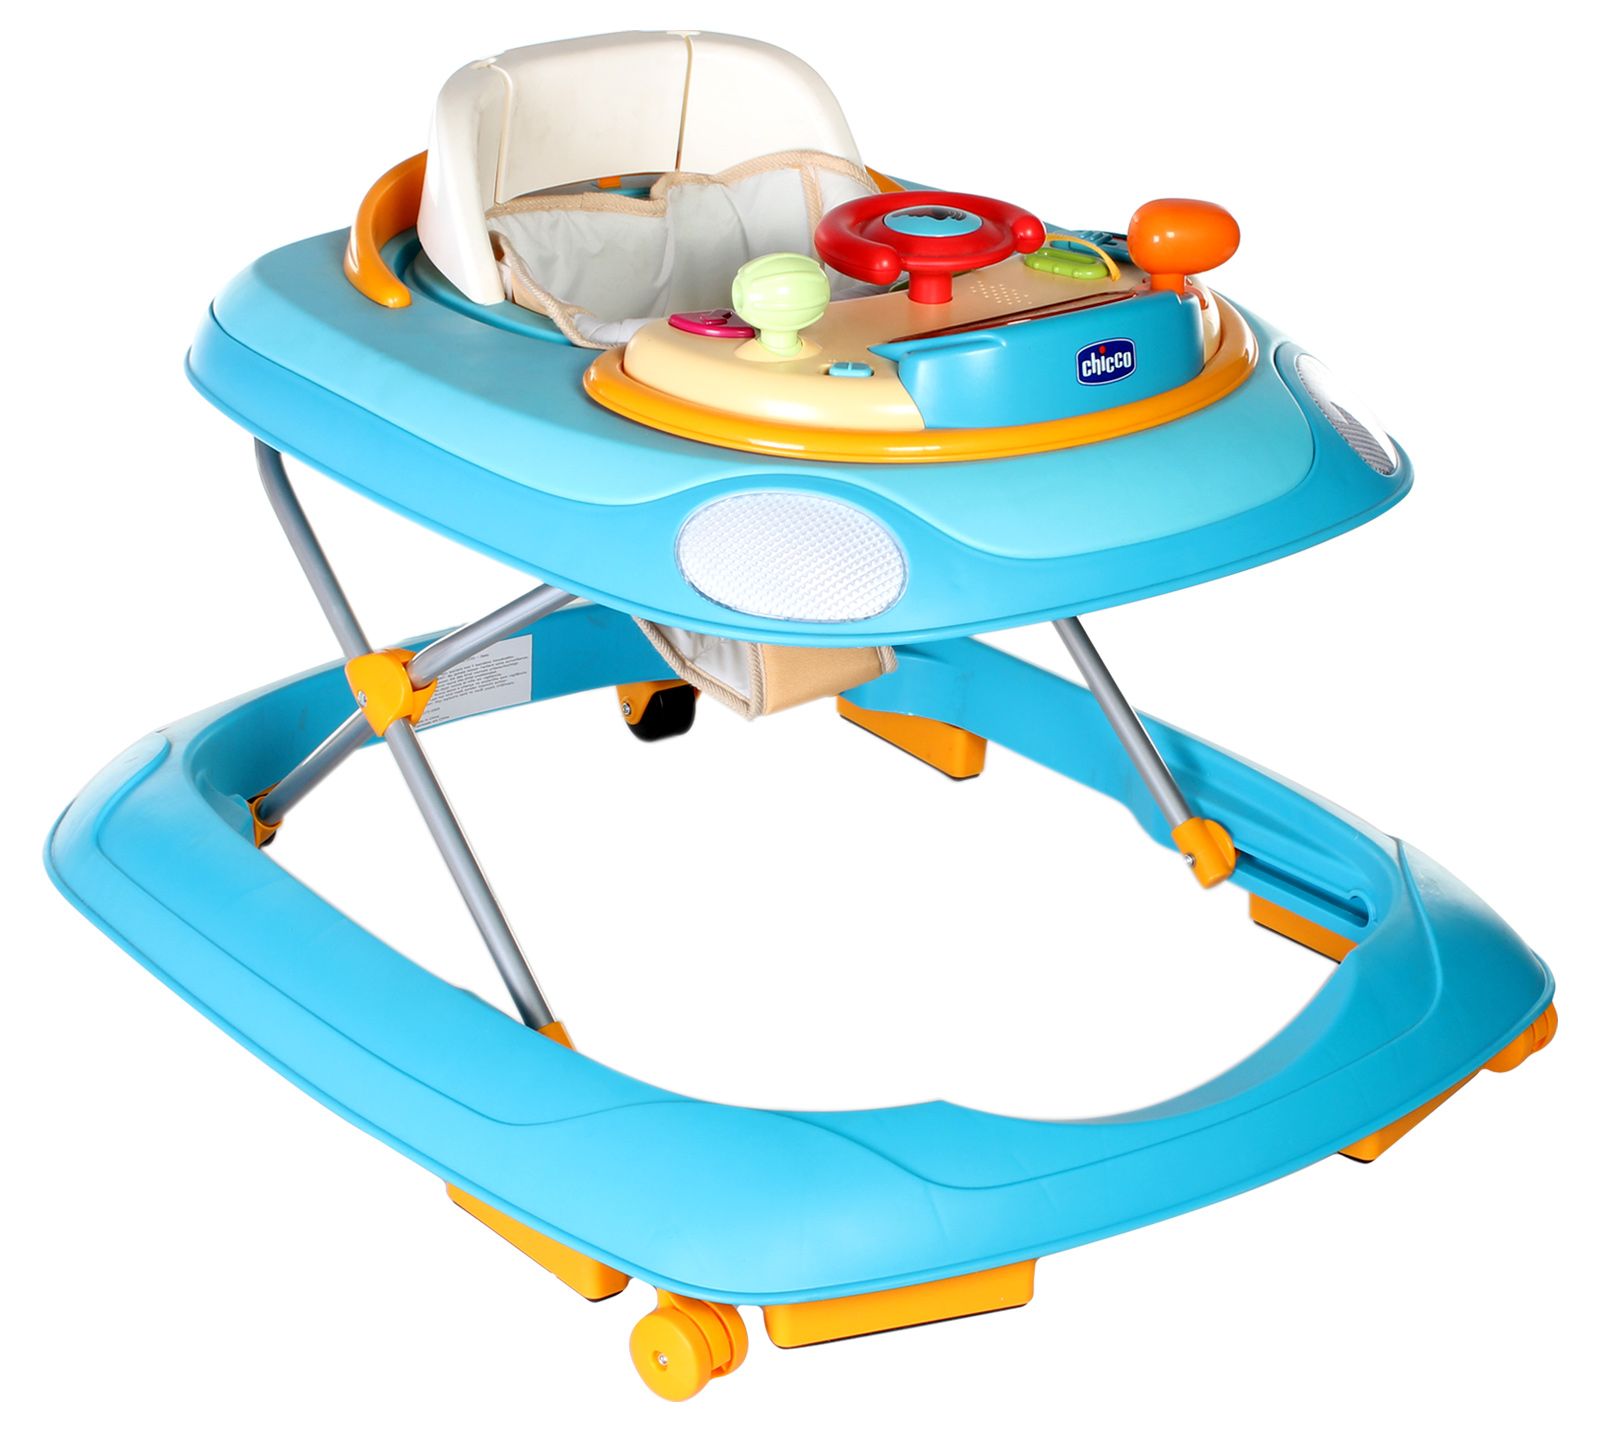 Chicco Band Baby Walker in Dinofood